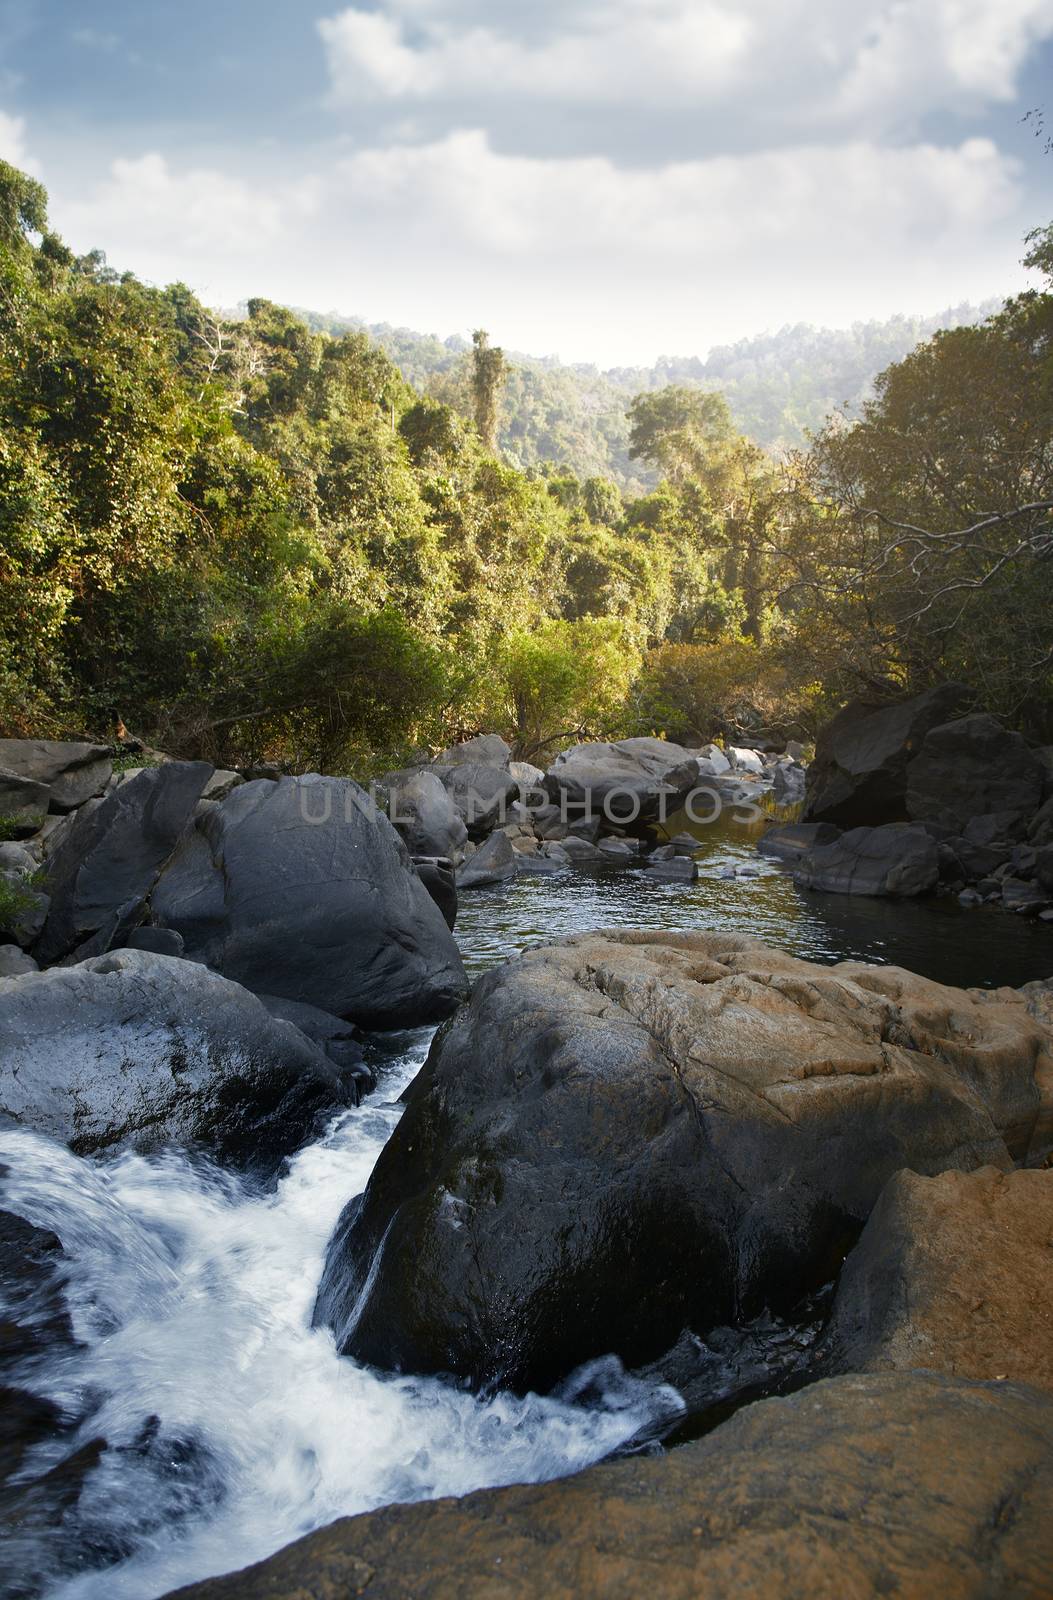 Indian jungle with shallow river between stones. Natural light and colors